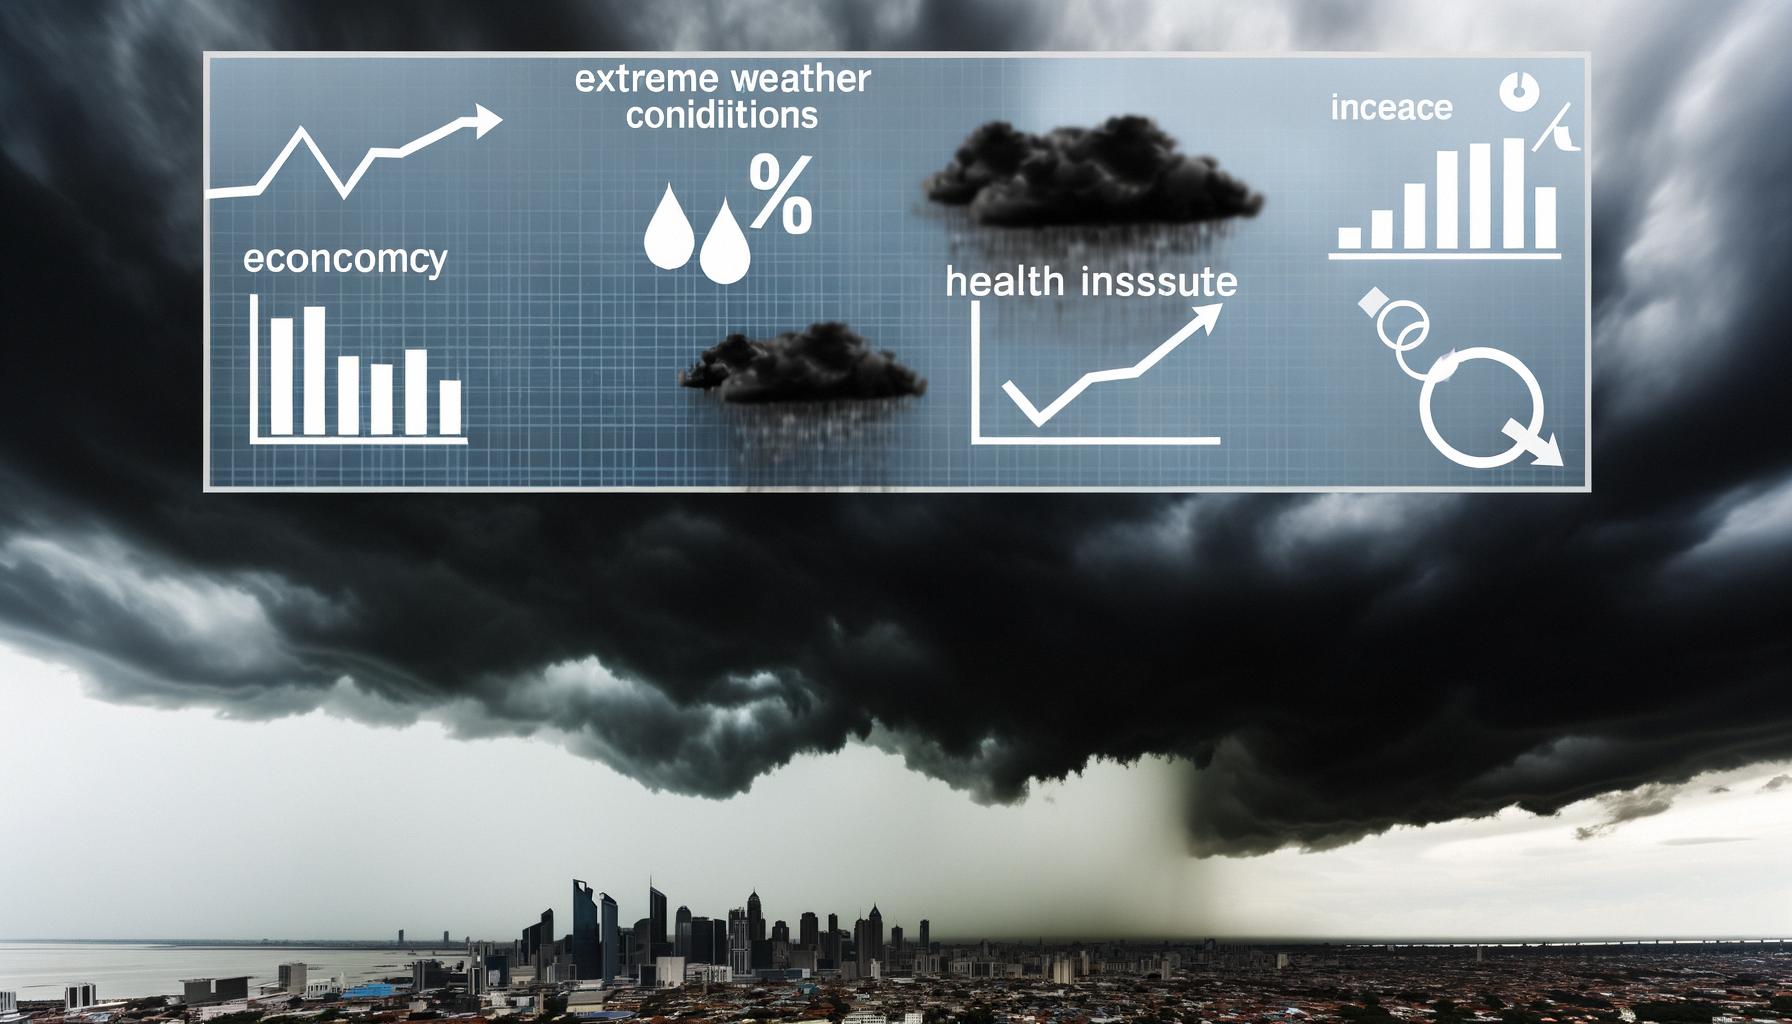 Extreme weather worsens, tied to climate change, affecting economies and health